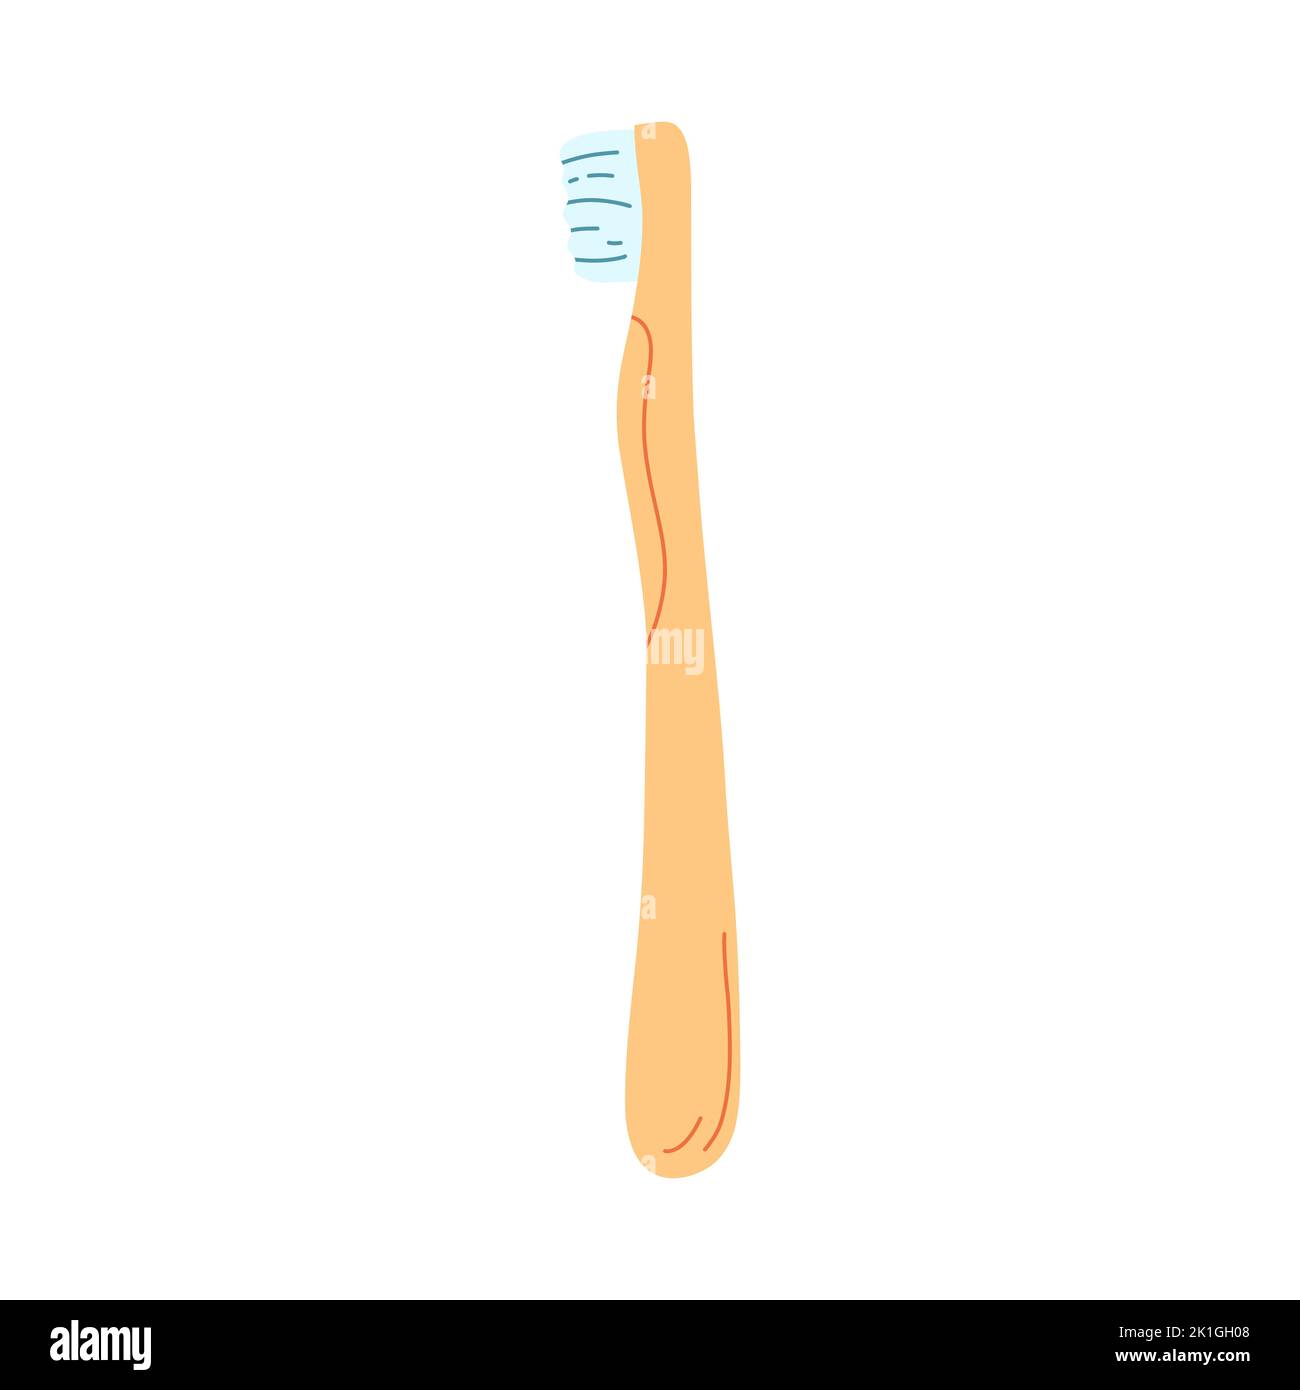 Hand drawn wooden toothbrush for brushing teeth in cartoon flat style. Vector illustration of dental supplies, dental care concept, oral hygiene. Stock Vector